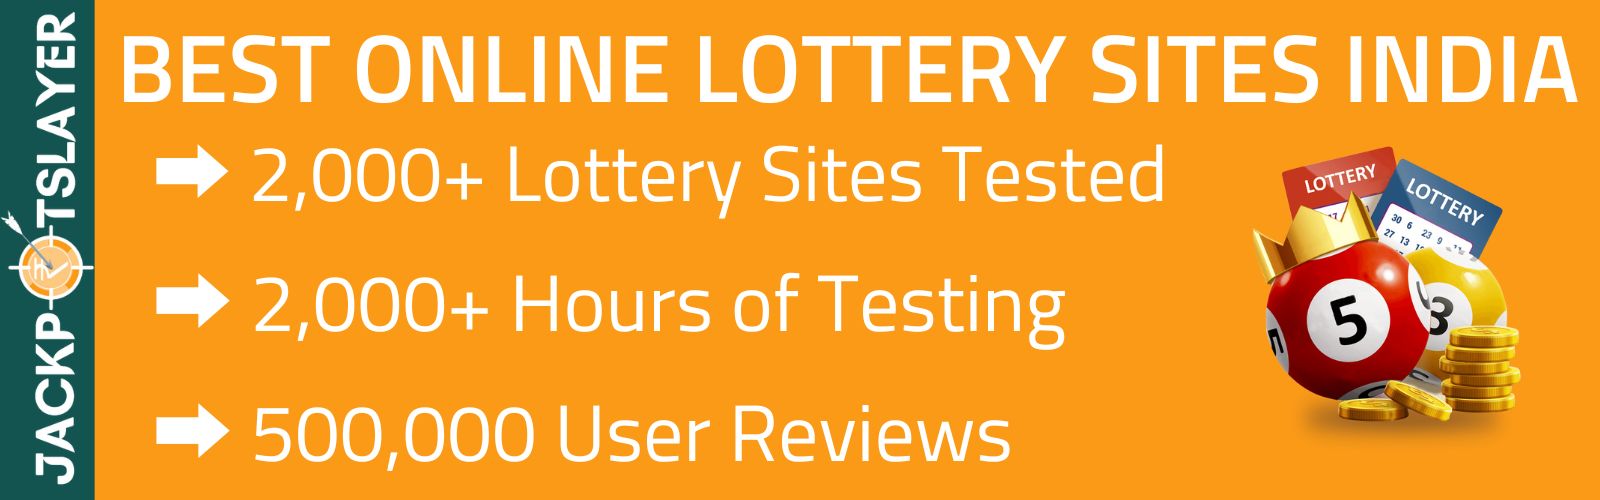 Online Lottery Sites India